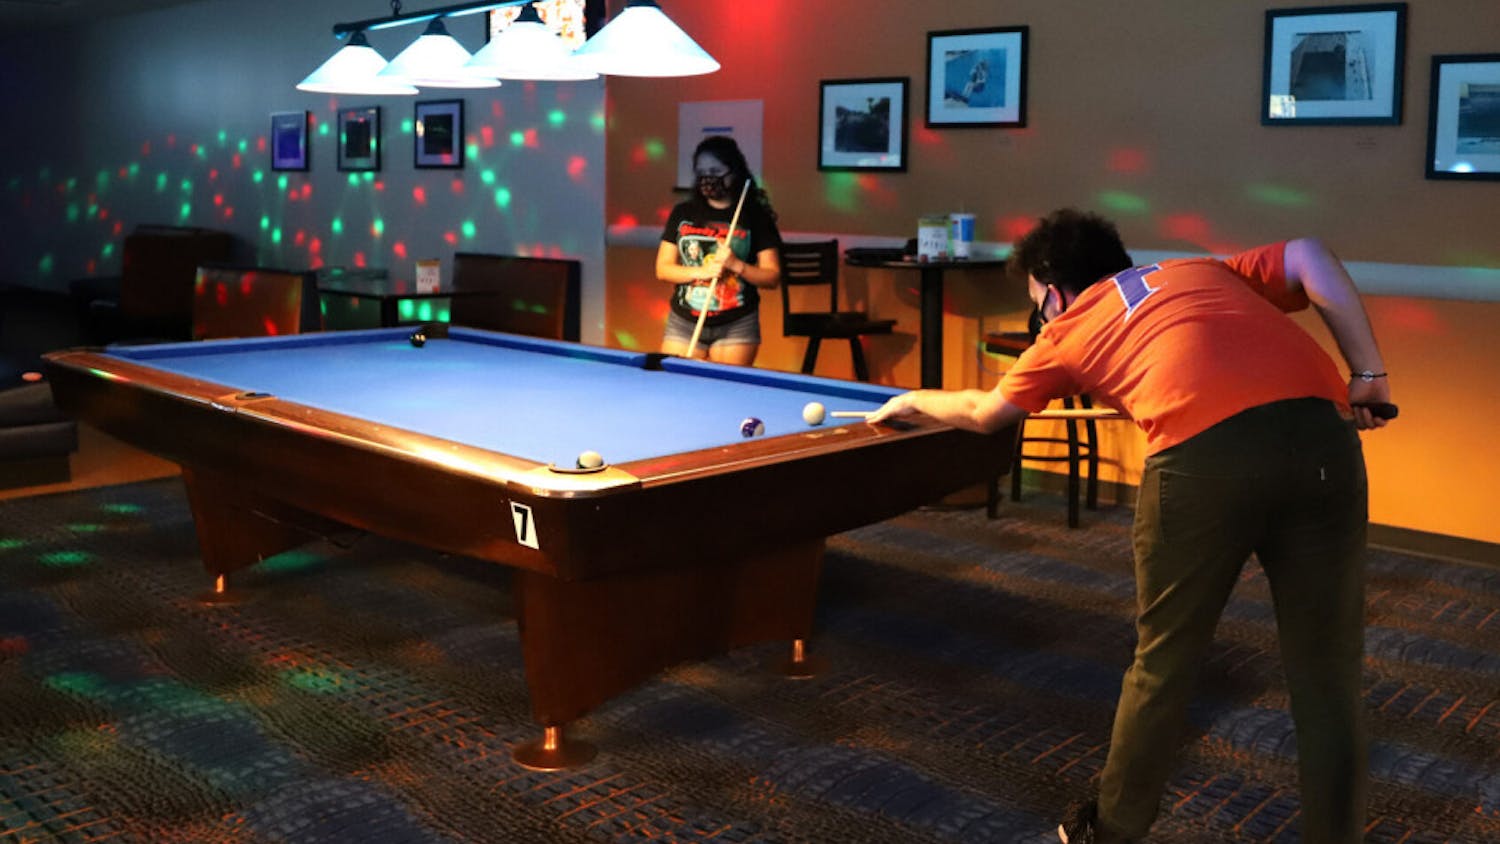 Max Slabbinck (right), 22, a senior media and society student, and Averi Hemingway, 21, a recent telecommunication graduate, shoot pool at the Reitz Union Game Room on Oct. 10, 2020. To ensure social distancing, the two pool tables nearest to Slabbinck and Hemingway are covered and face masks are required at all times.